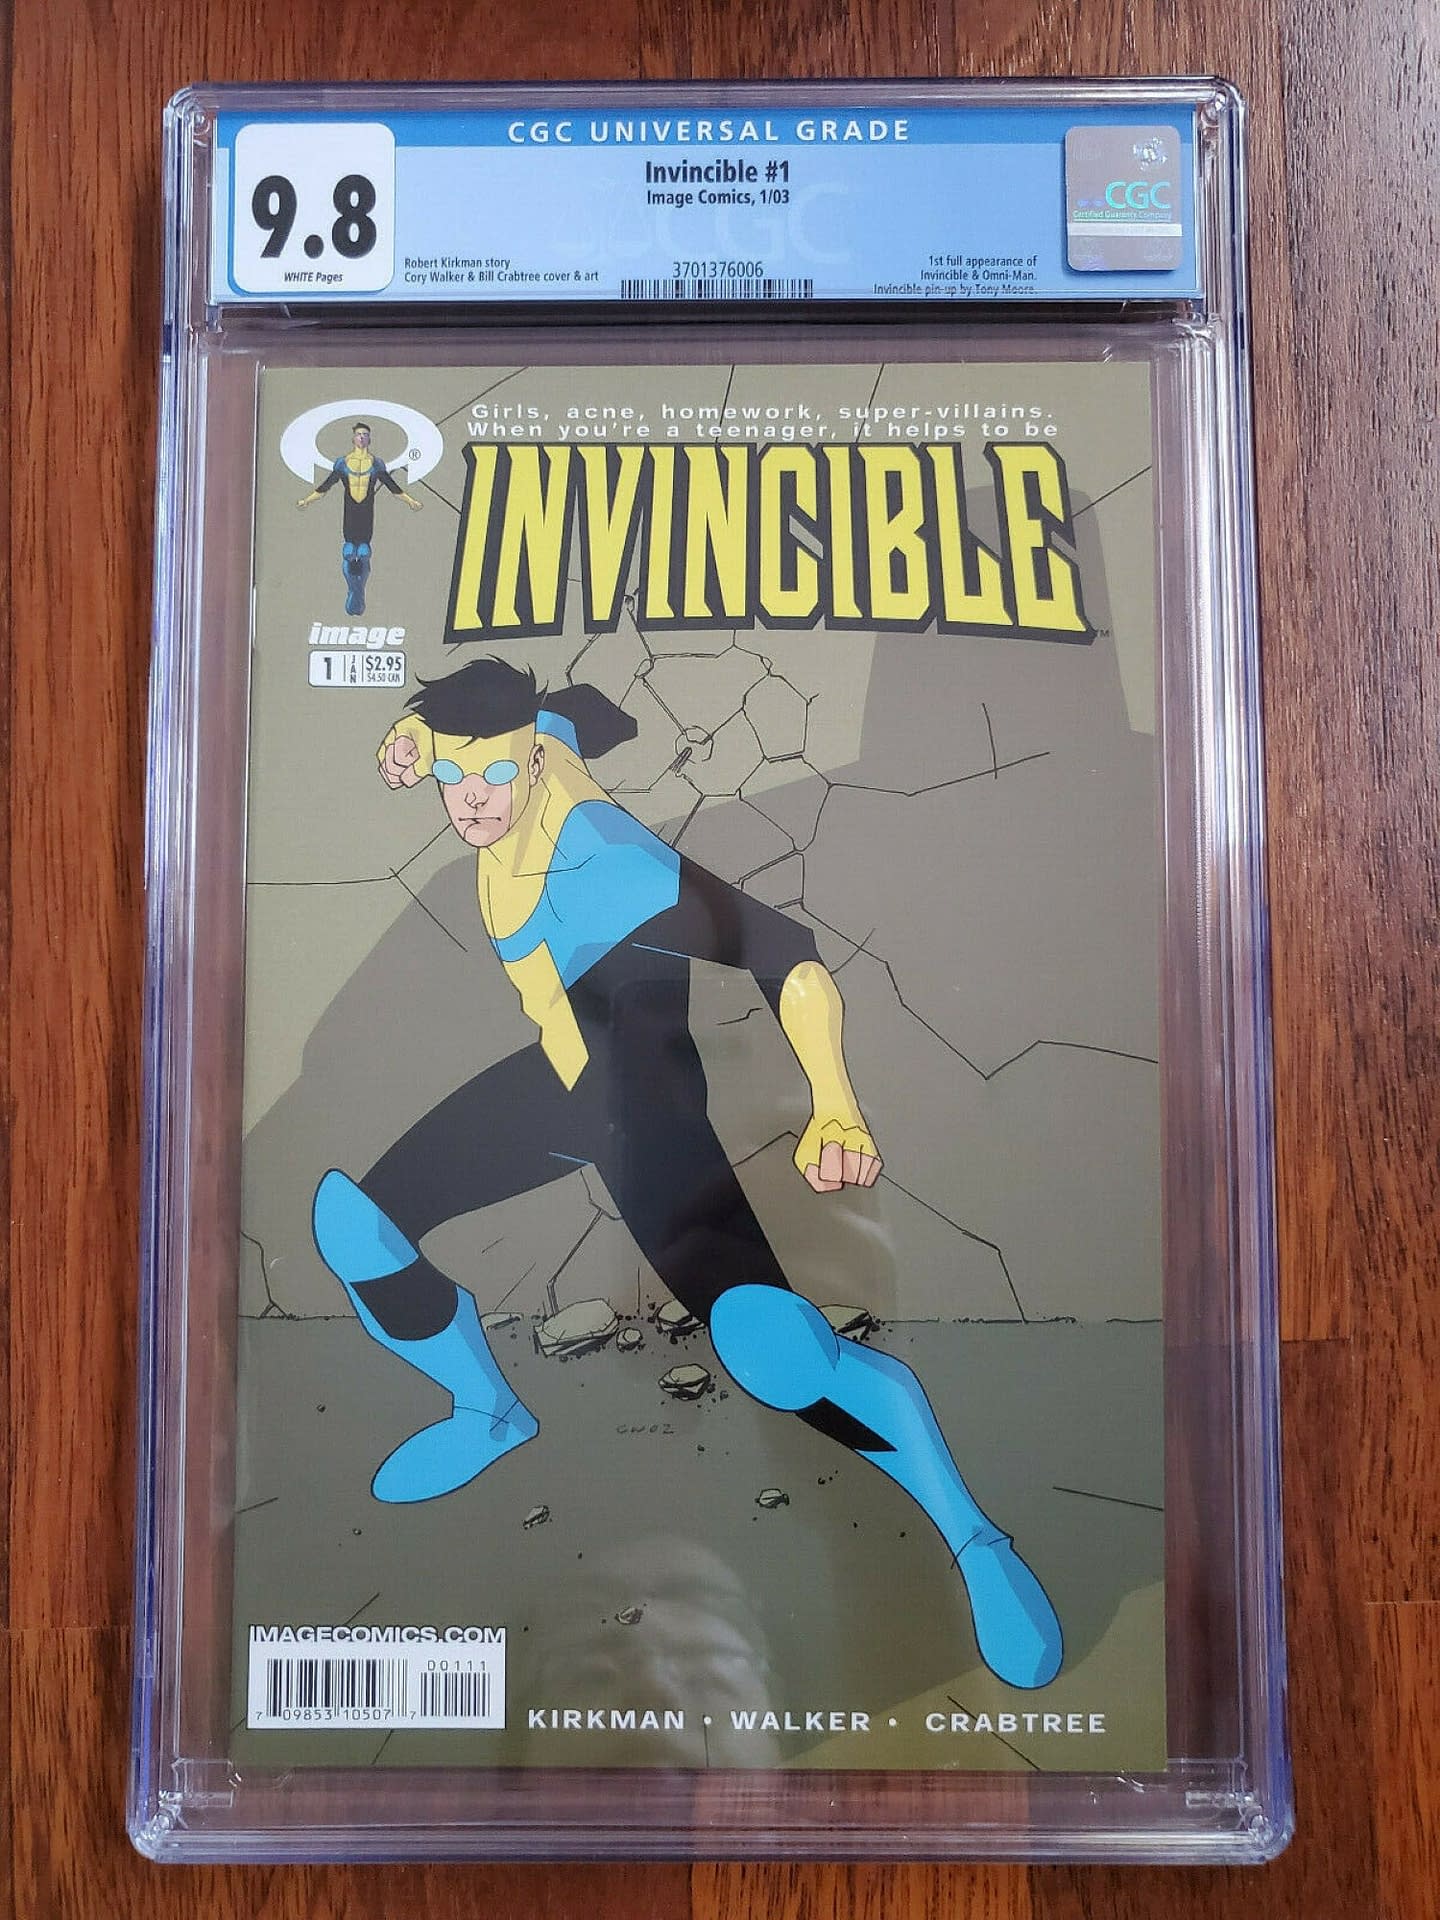 Invincible Has Sold Over 100,000 Graphic Novels in 2021 Already